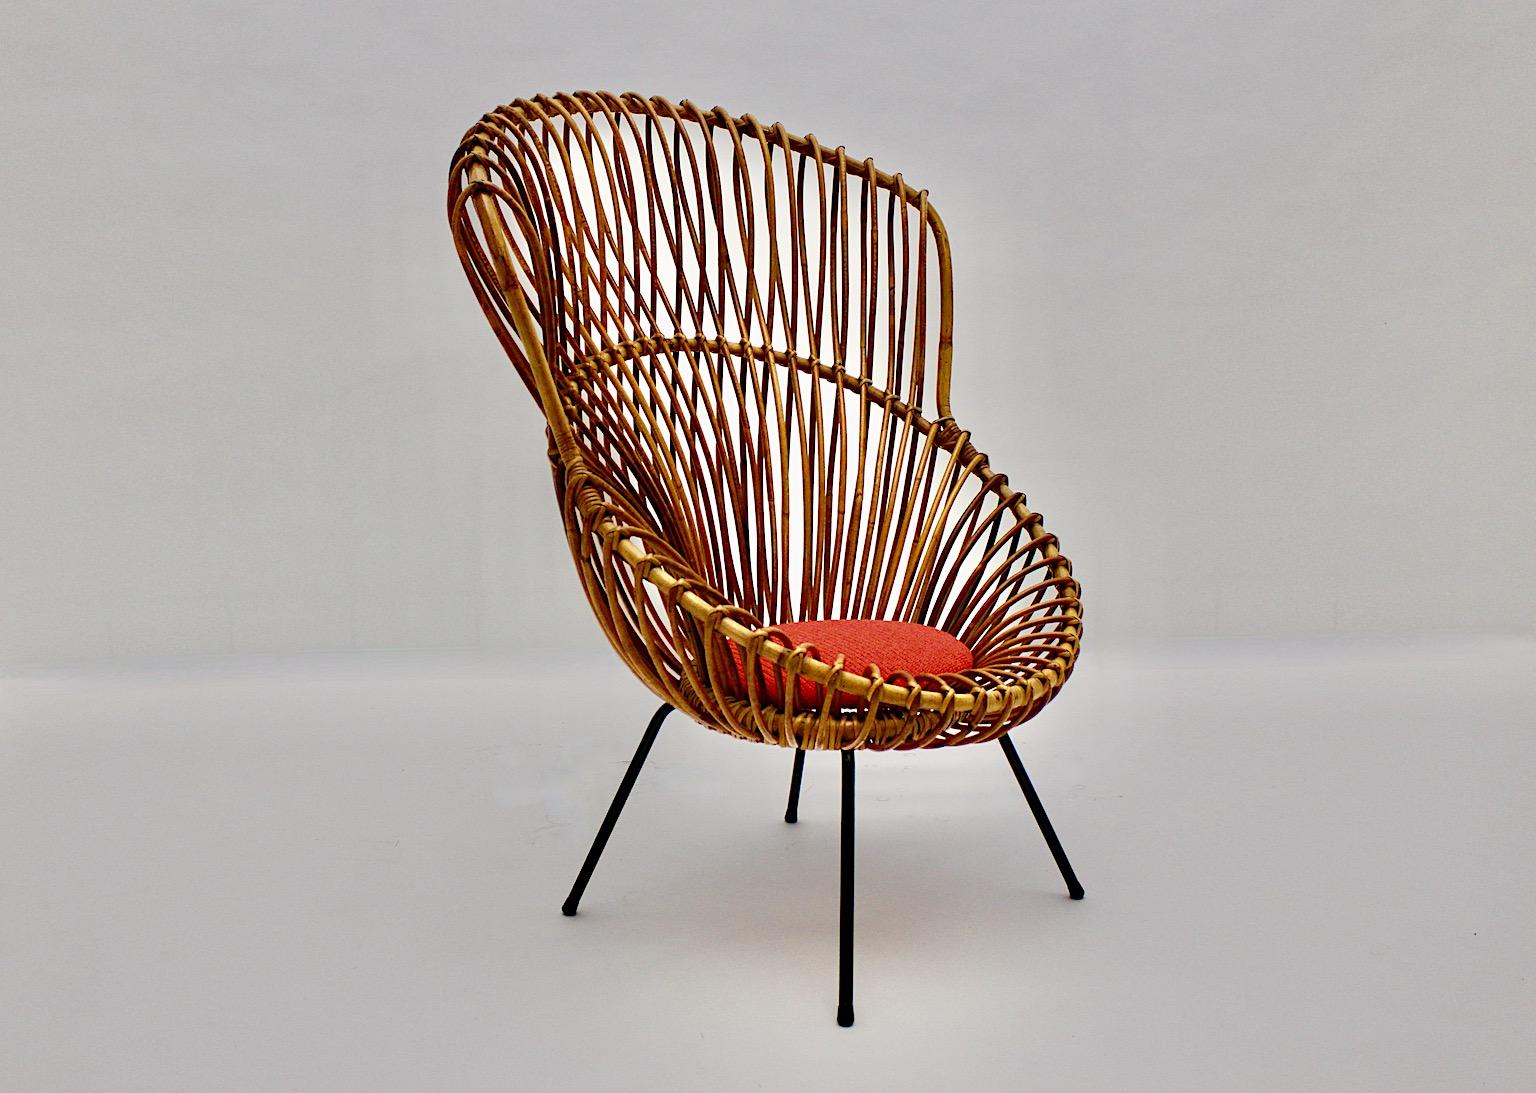 Mid-Century Modern vintage riviera style organic lounge chair or side chair from woven rattan and metal attributed to the design by Franco Albini 1950s Italy.
While the seat shell shows a beautiful woven rattan work the feet from black lacquered